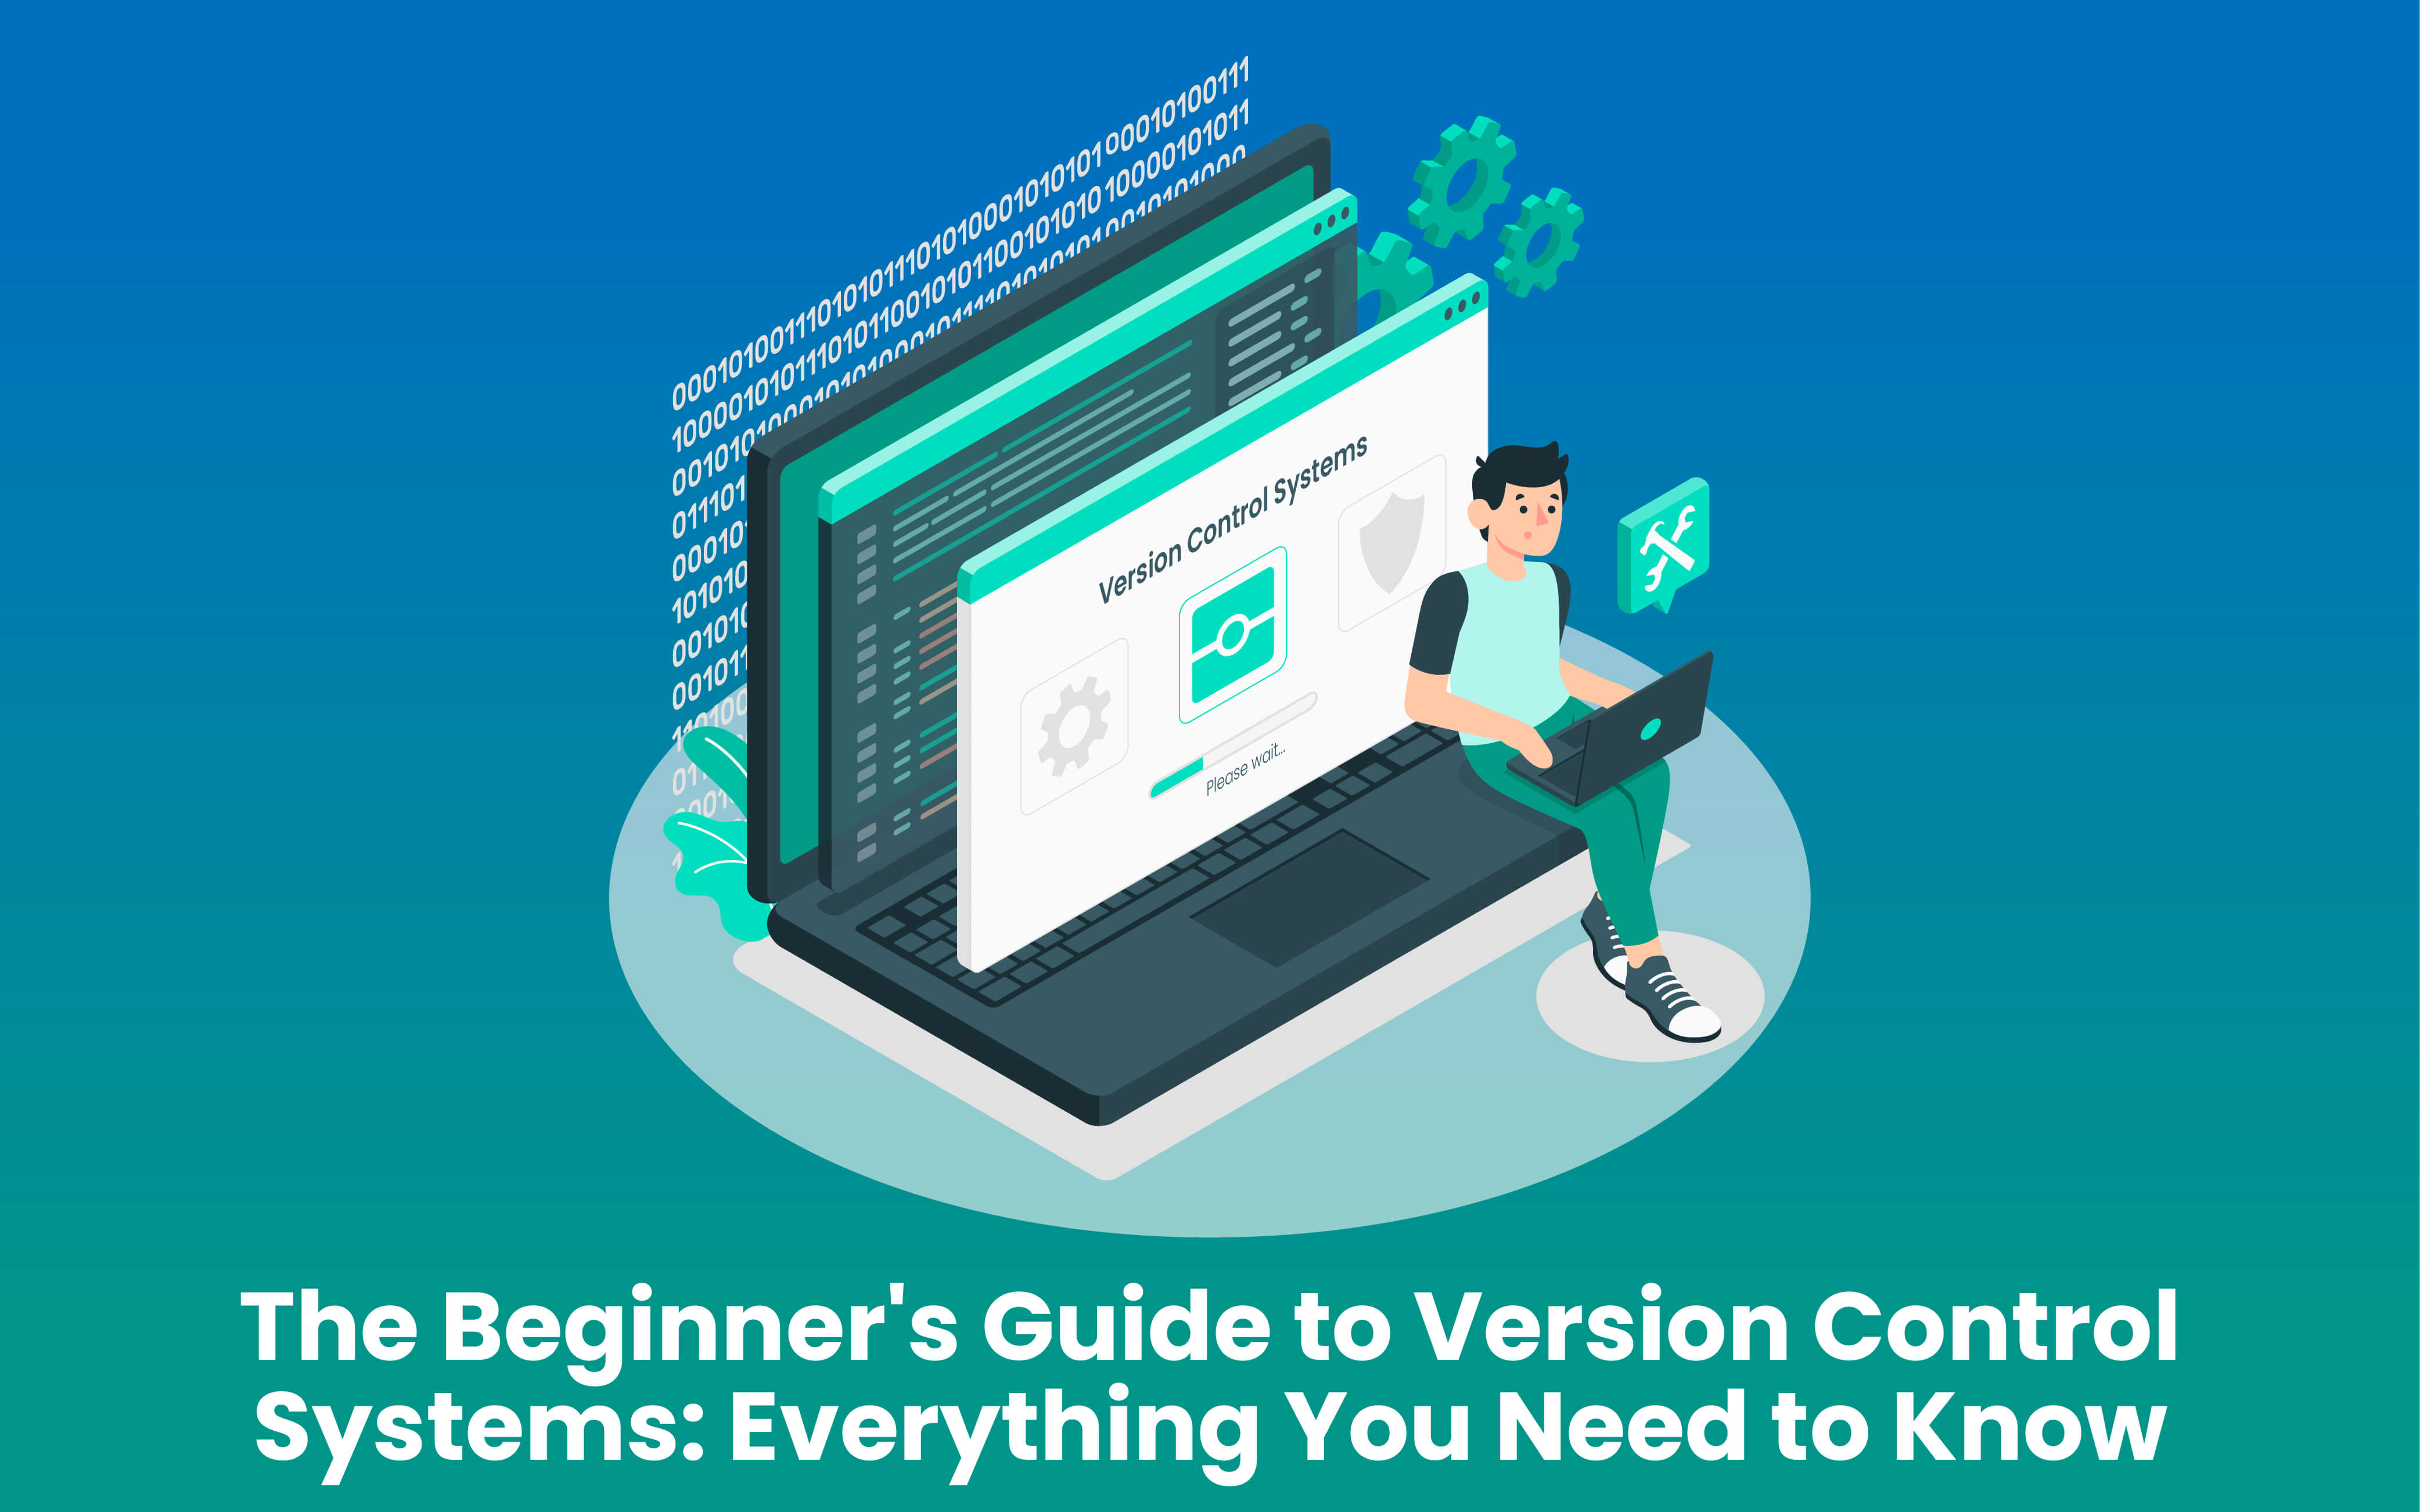 The Beginner’s Guide to Version Control Systems: Everything You Need to Know